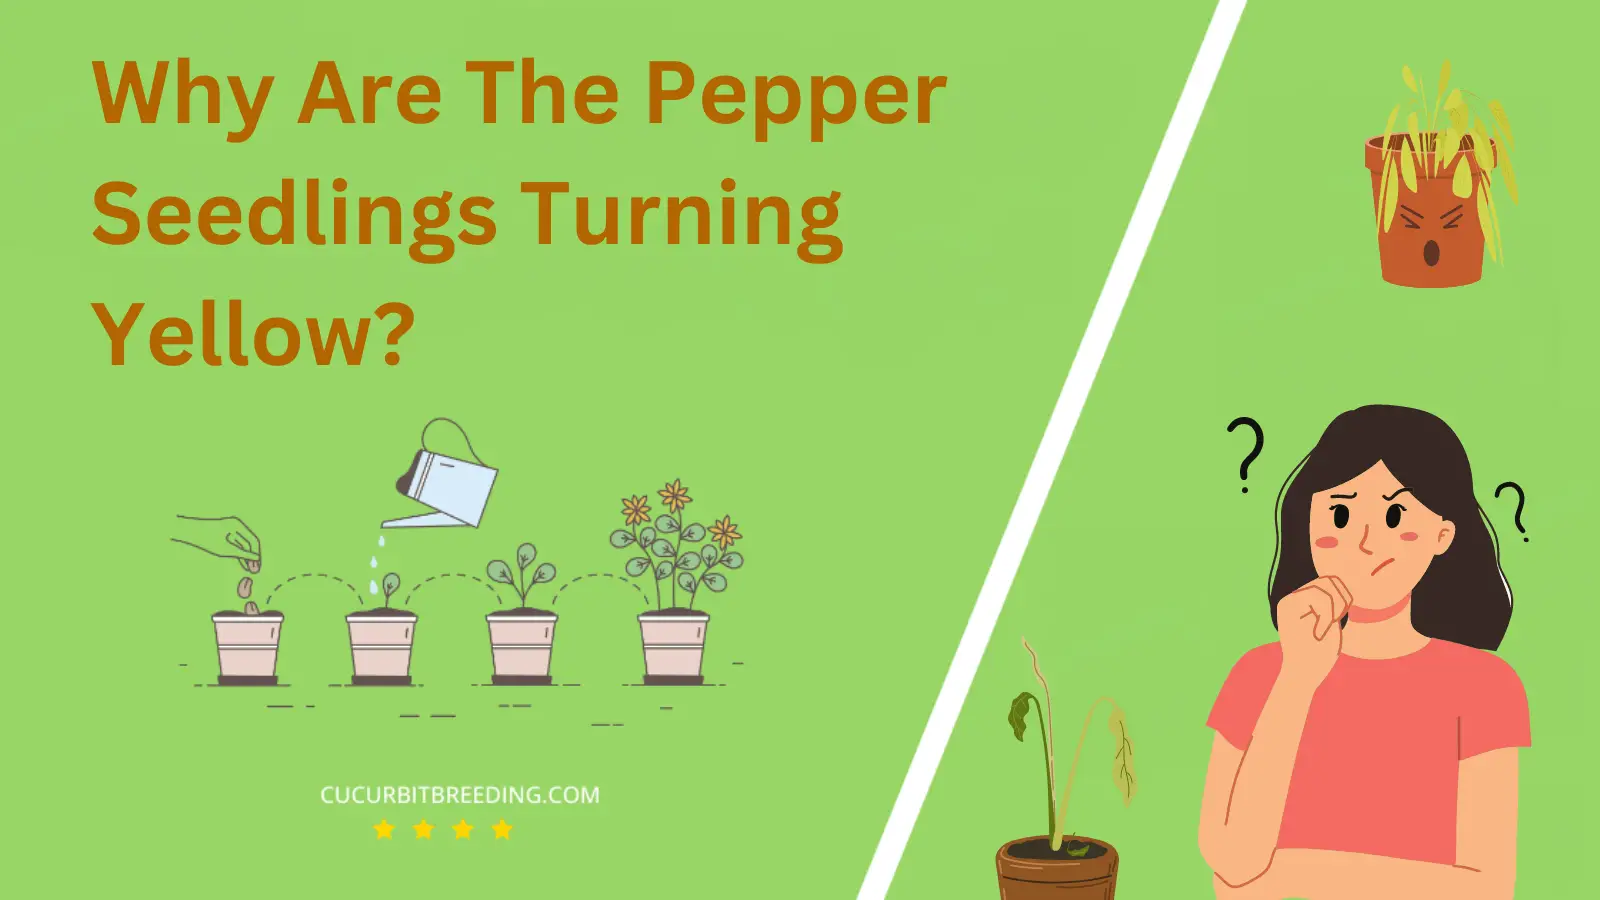 Why Are The Pepper Seedlings Turning Yellow